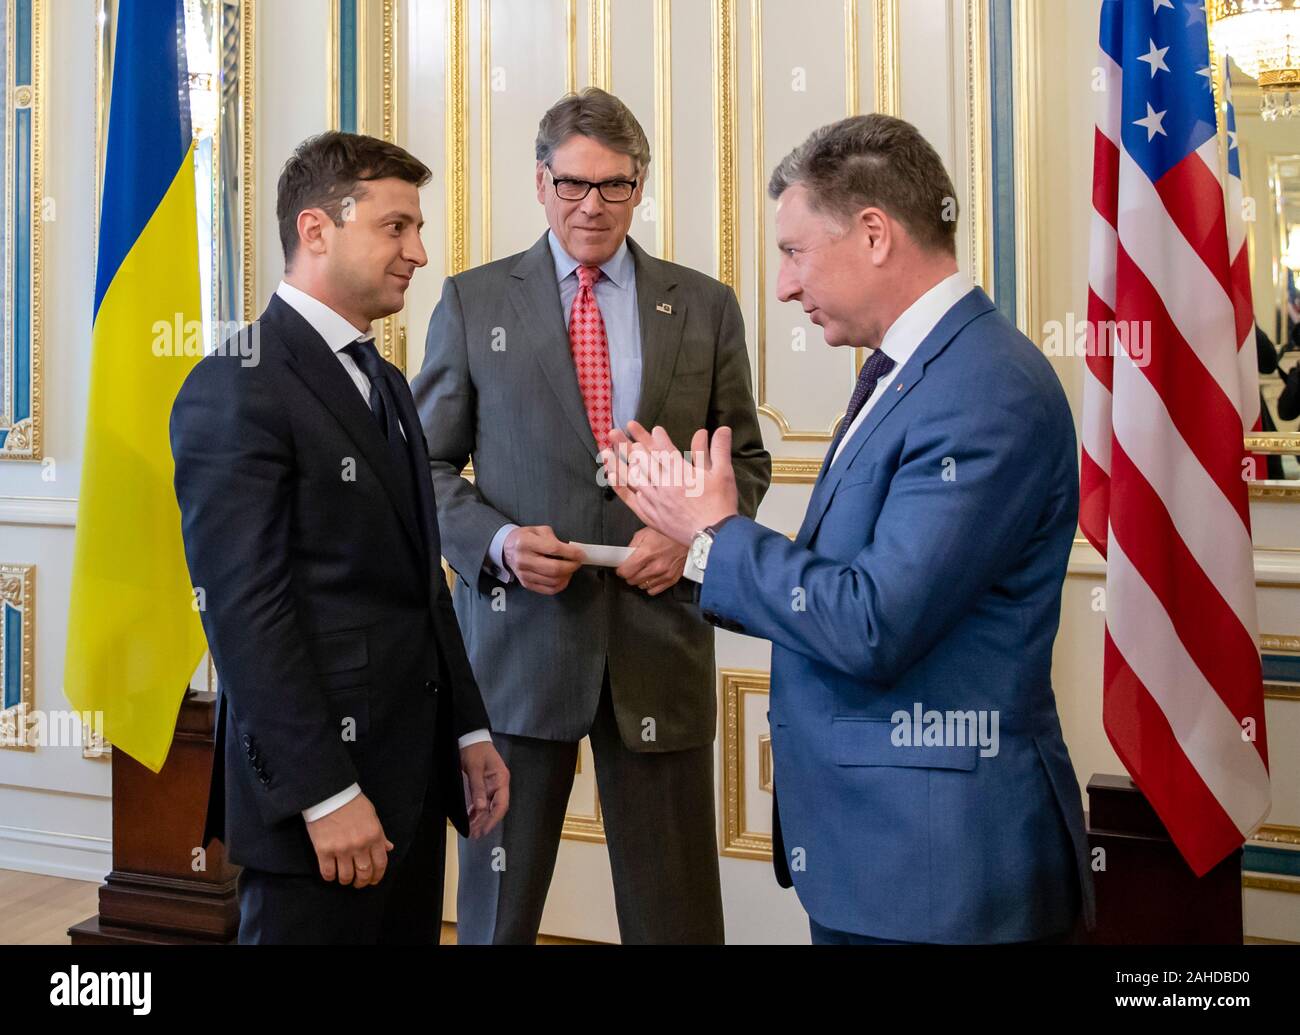 U.S. Energy Secretary Rick Perry, center, introduces Ukrainian President Volodymyr Zelensky to members of his delegation during a meeting at the Presidential Palace May 20, 2019 in Kiev, Ukraine. Stock Photo